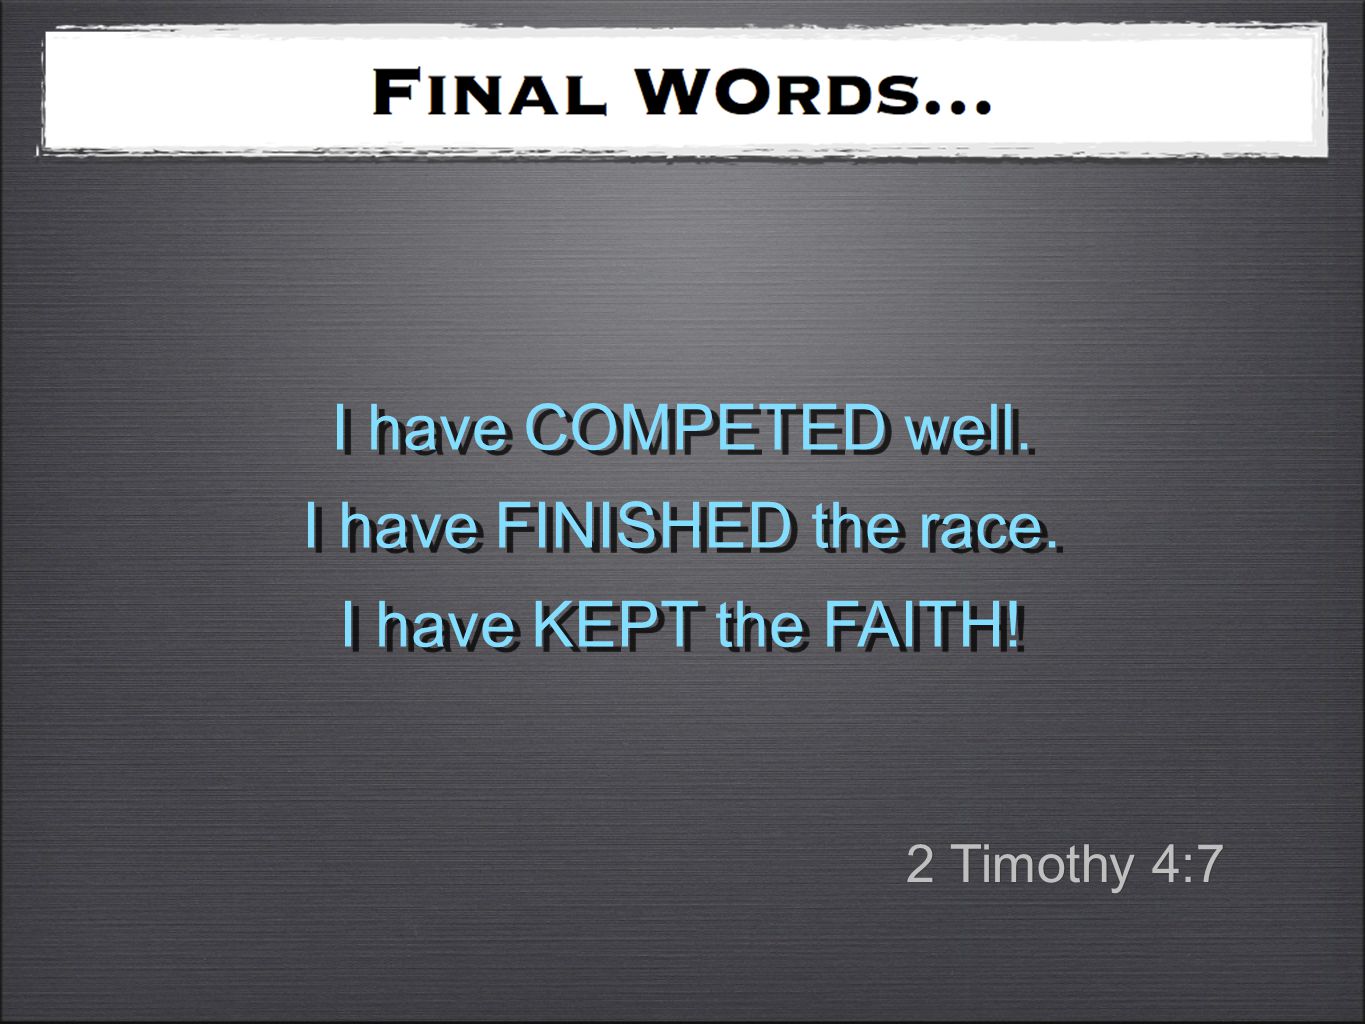 I have COMPETED well. I have FINISHED the race. I have KEPT the FAITH.